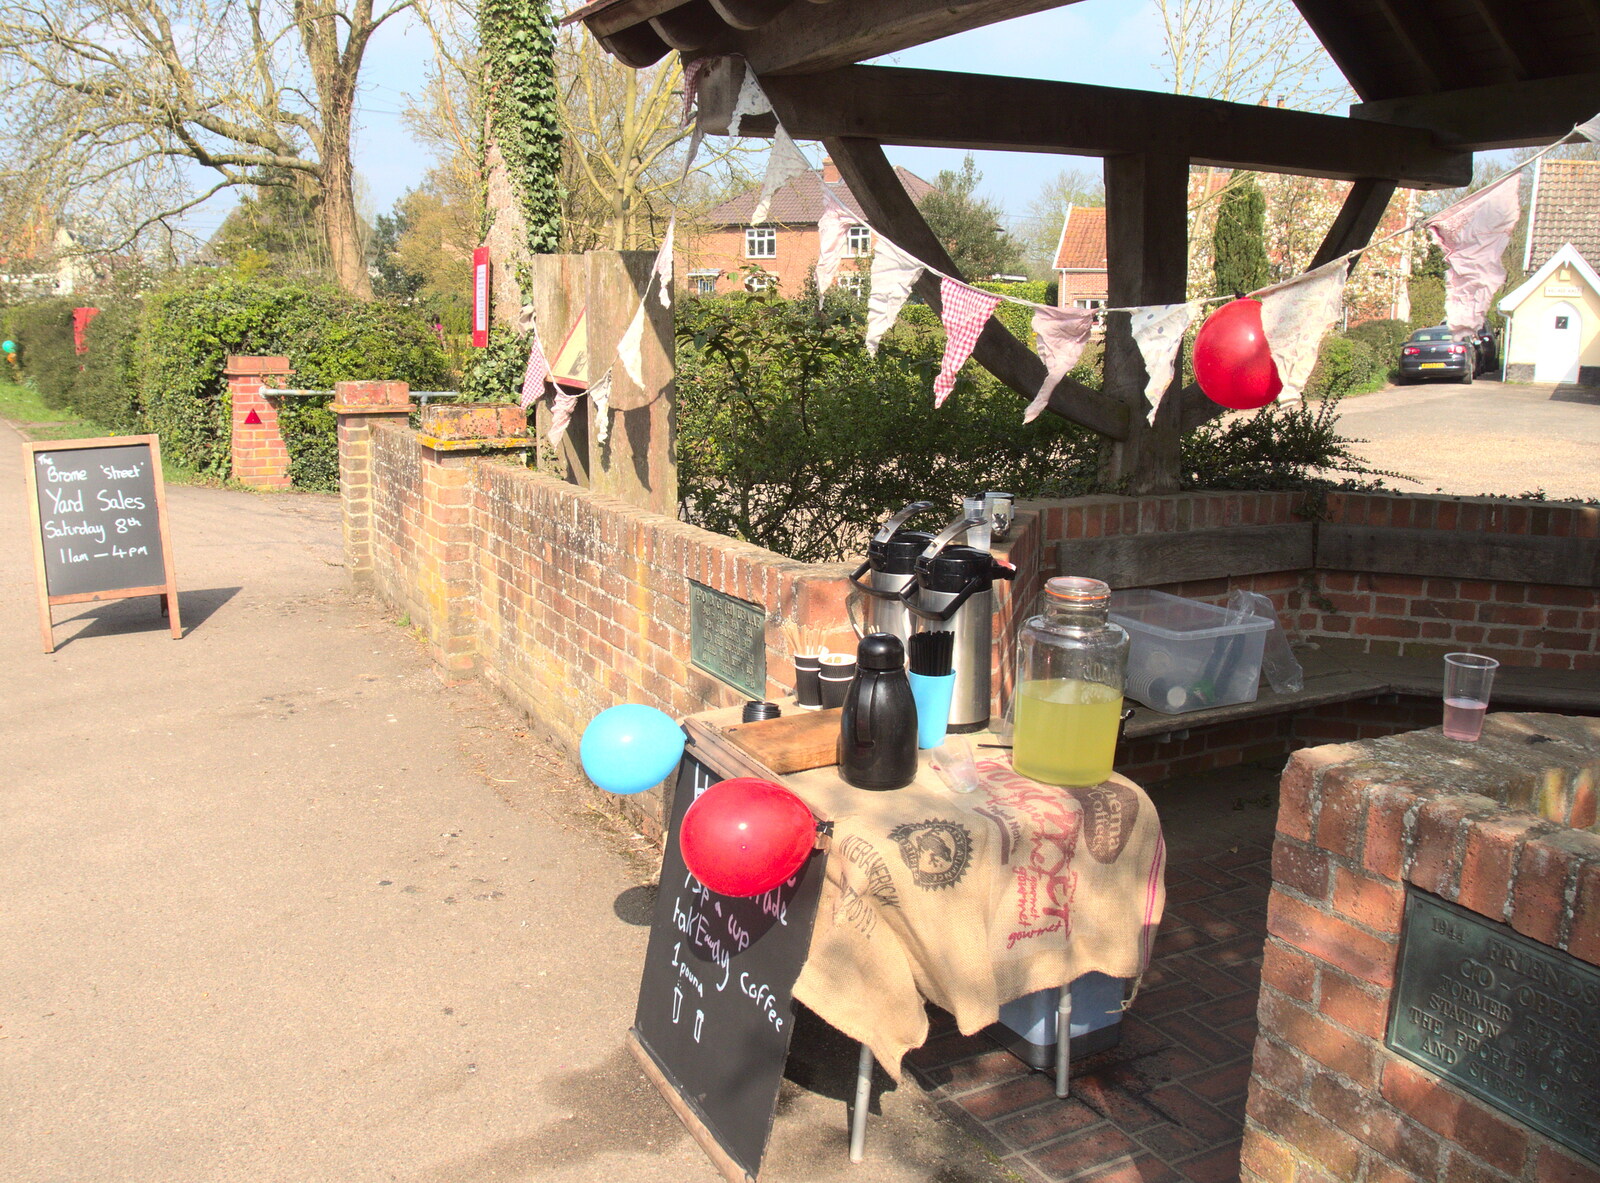 There are refreshments in the memorial shelter from Comedy Night, and a Village Yard Sale, Eye and Brome, Suffolk - 8th April 2017